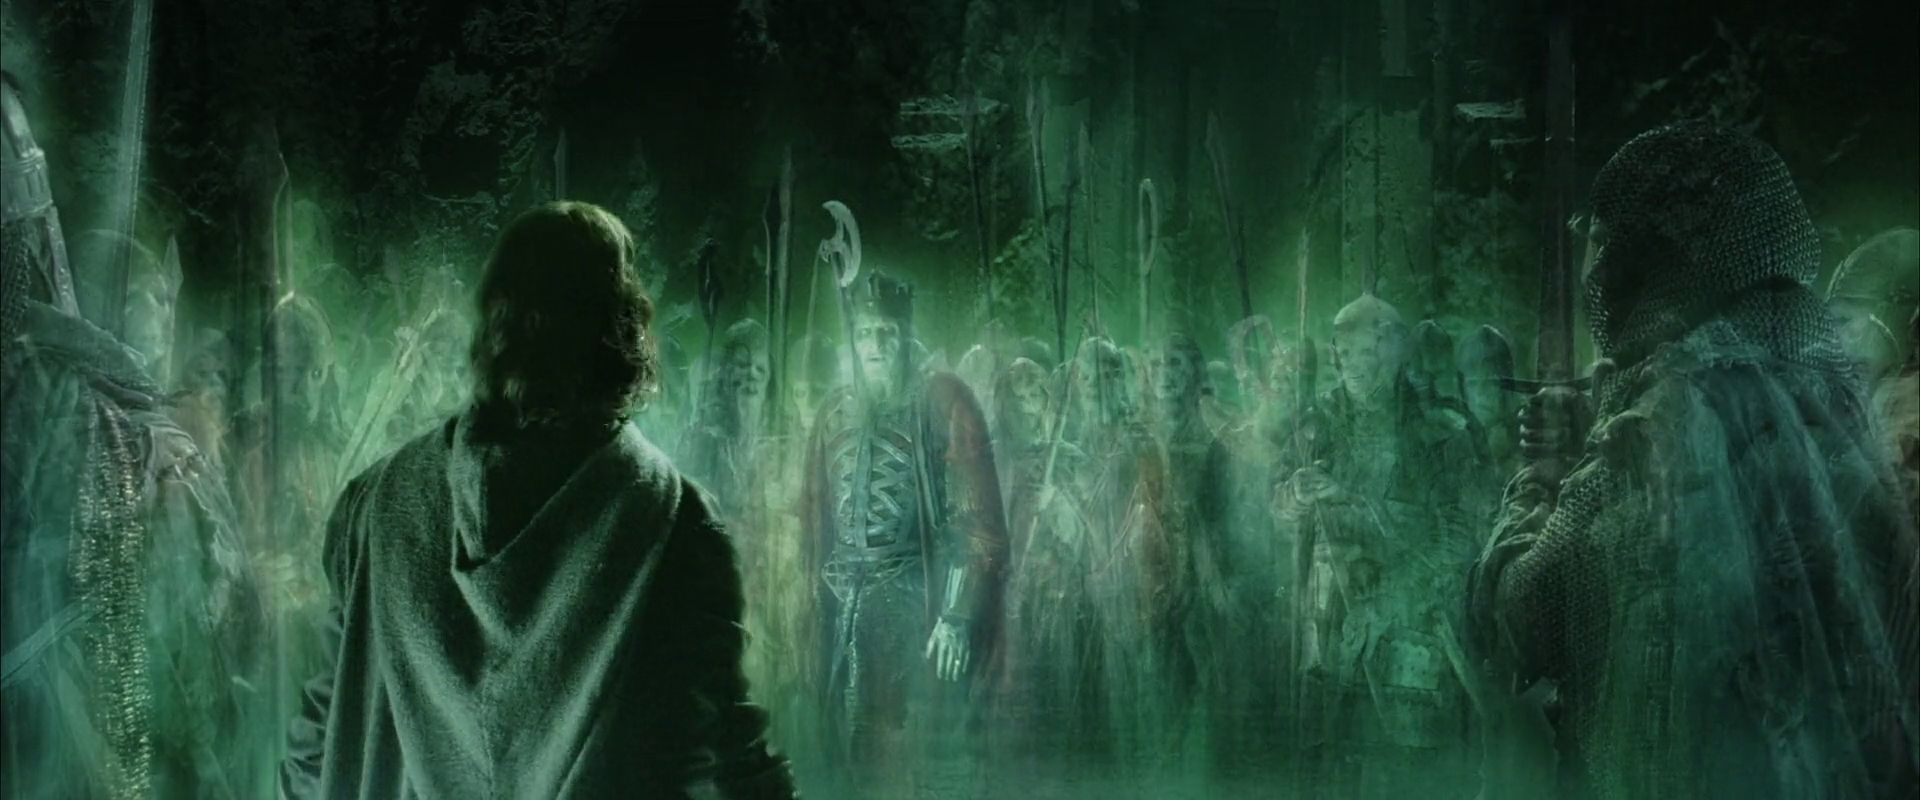 The Army Of The Dead in Lord of the Rings